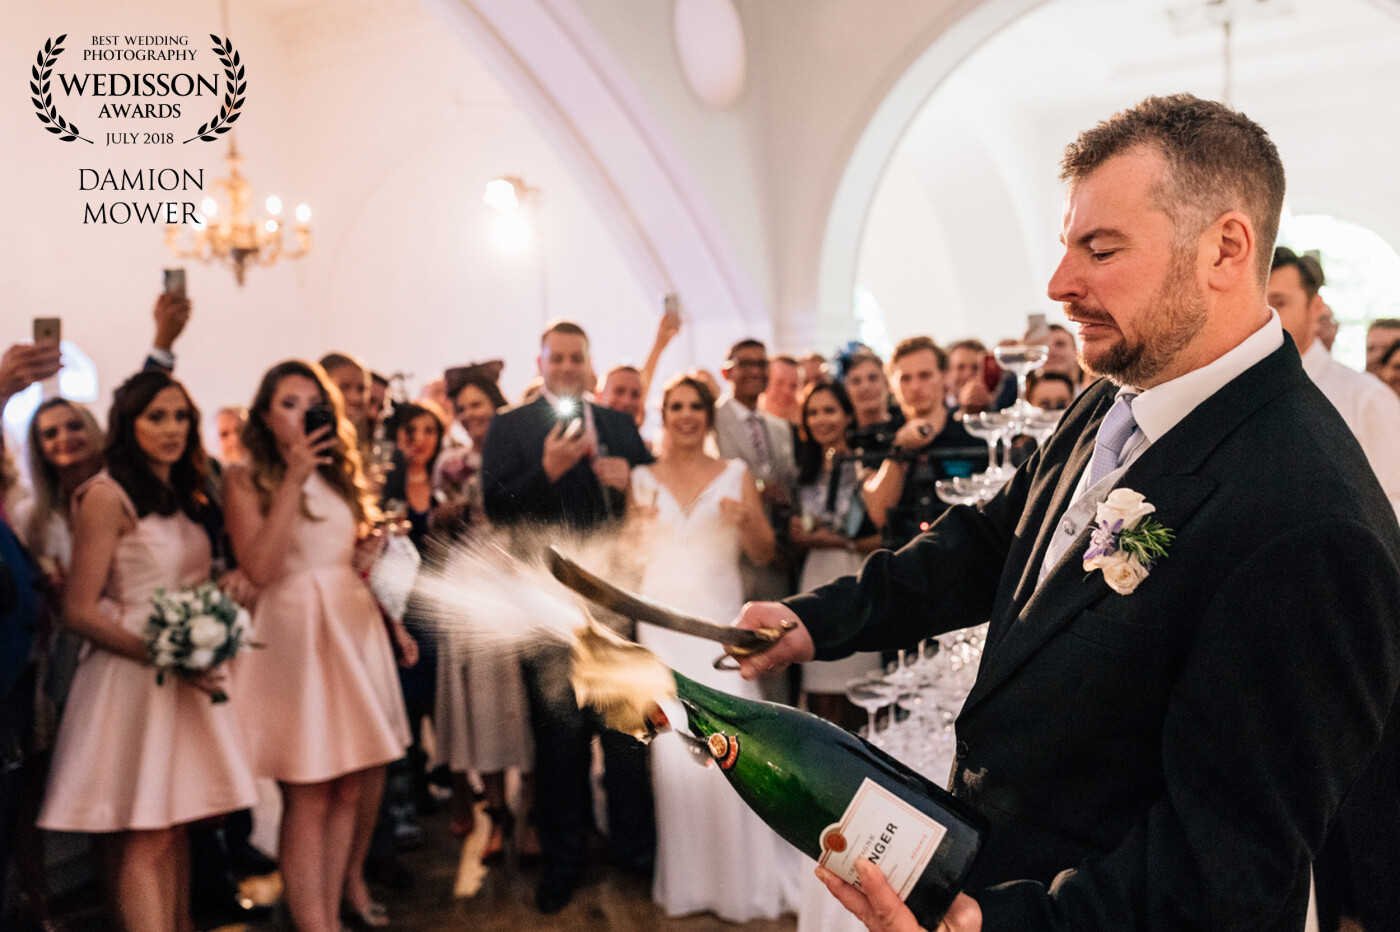 Simon at One Marylebone Wedding in London, showing his guests how to open a bottle of champagne with a sabre, before elegantly pouring the wine onto a champagne tower.